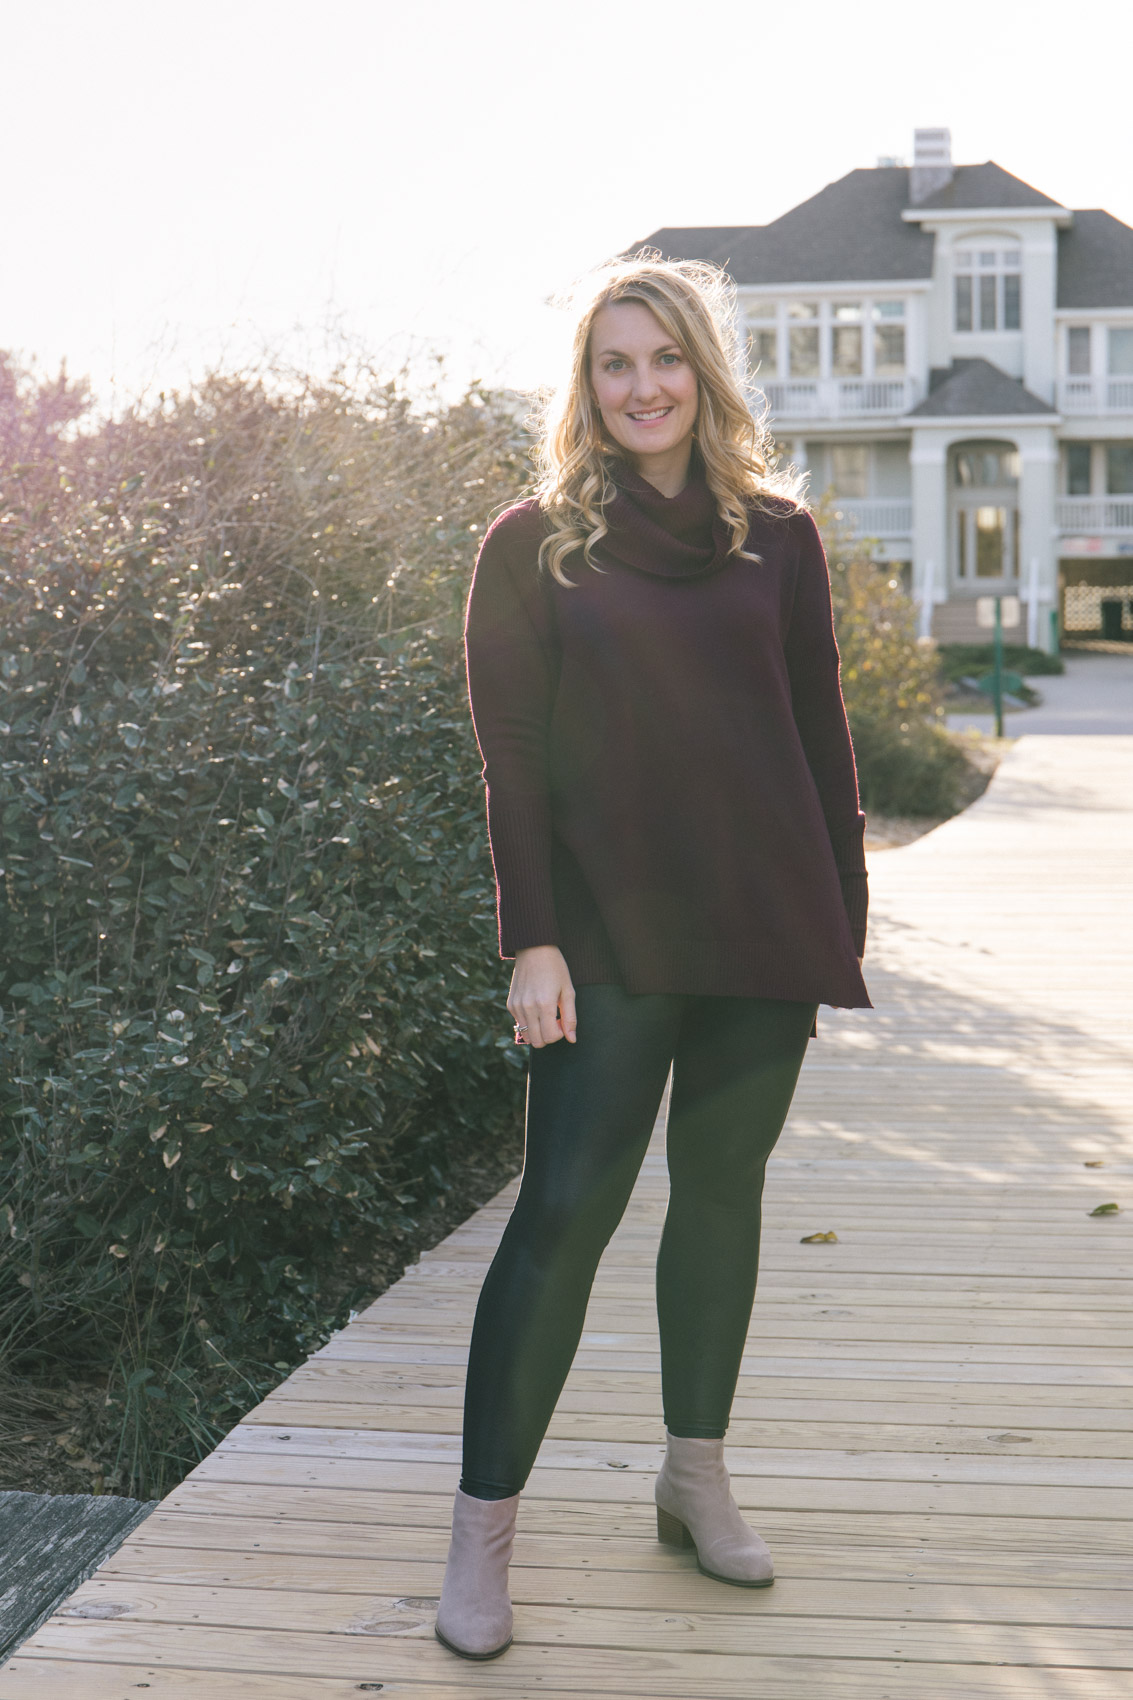 spanx faux leather leggings review - See (Anna) Jane.